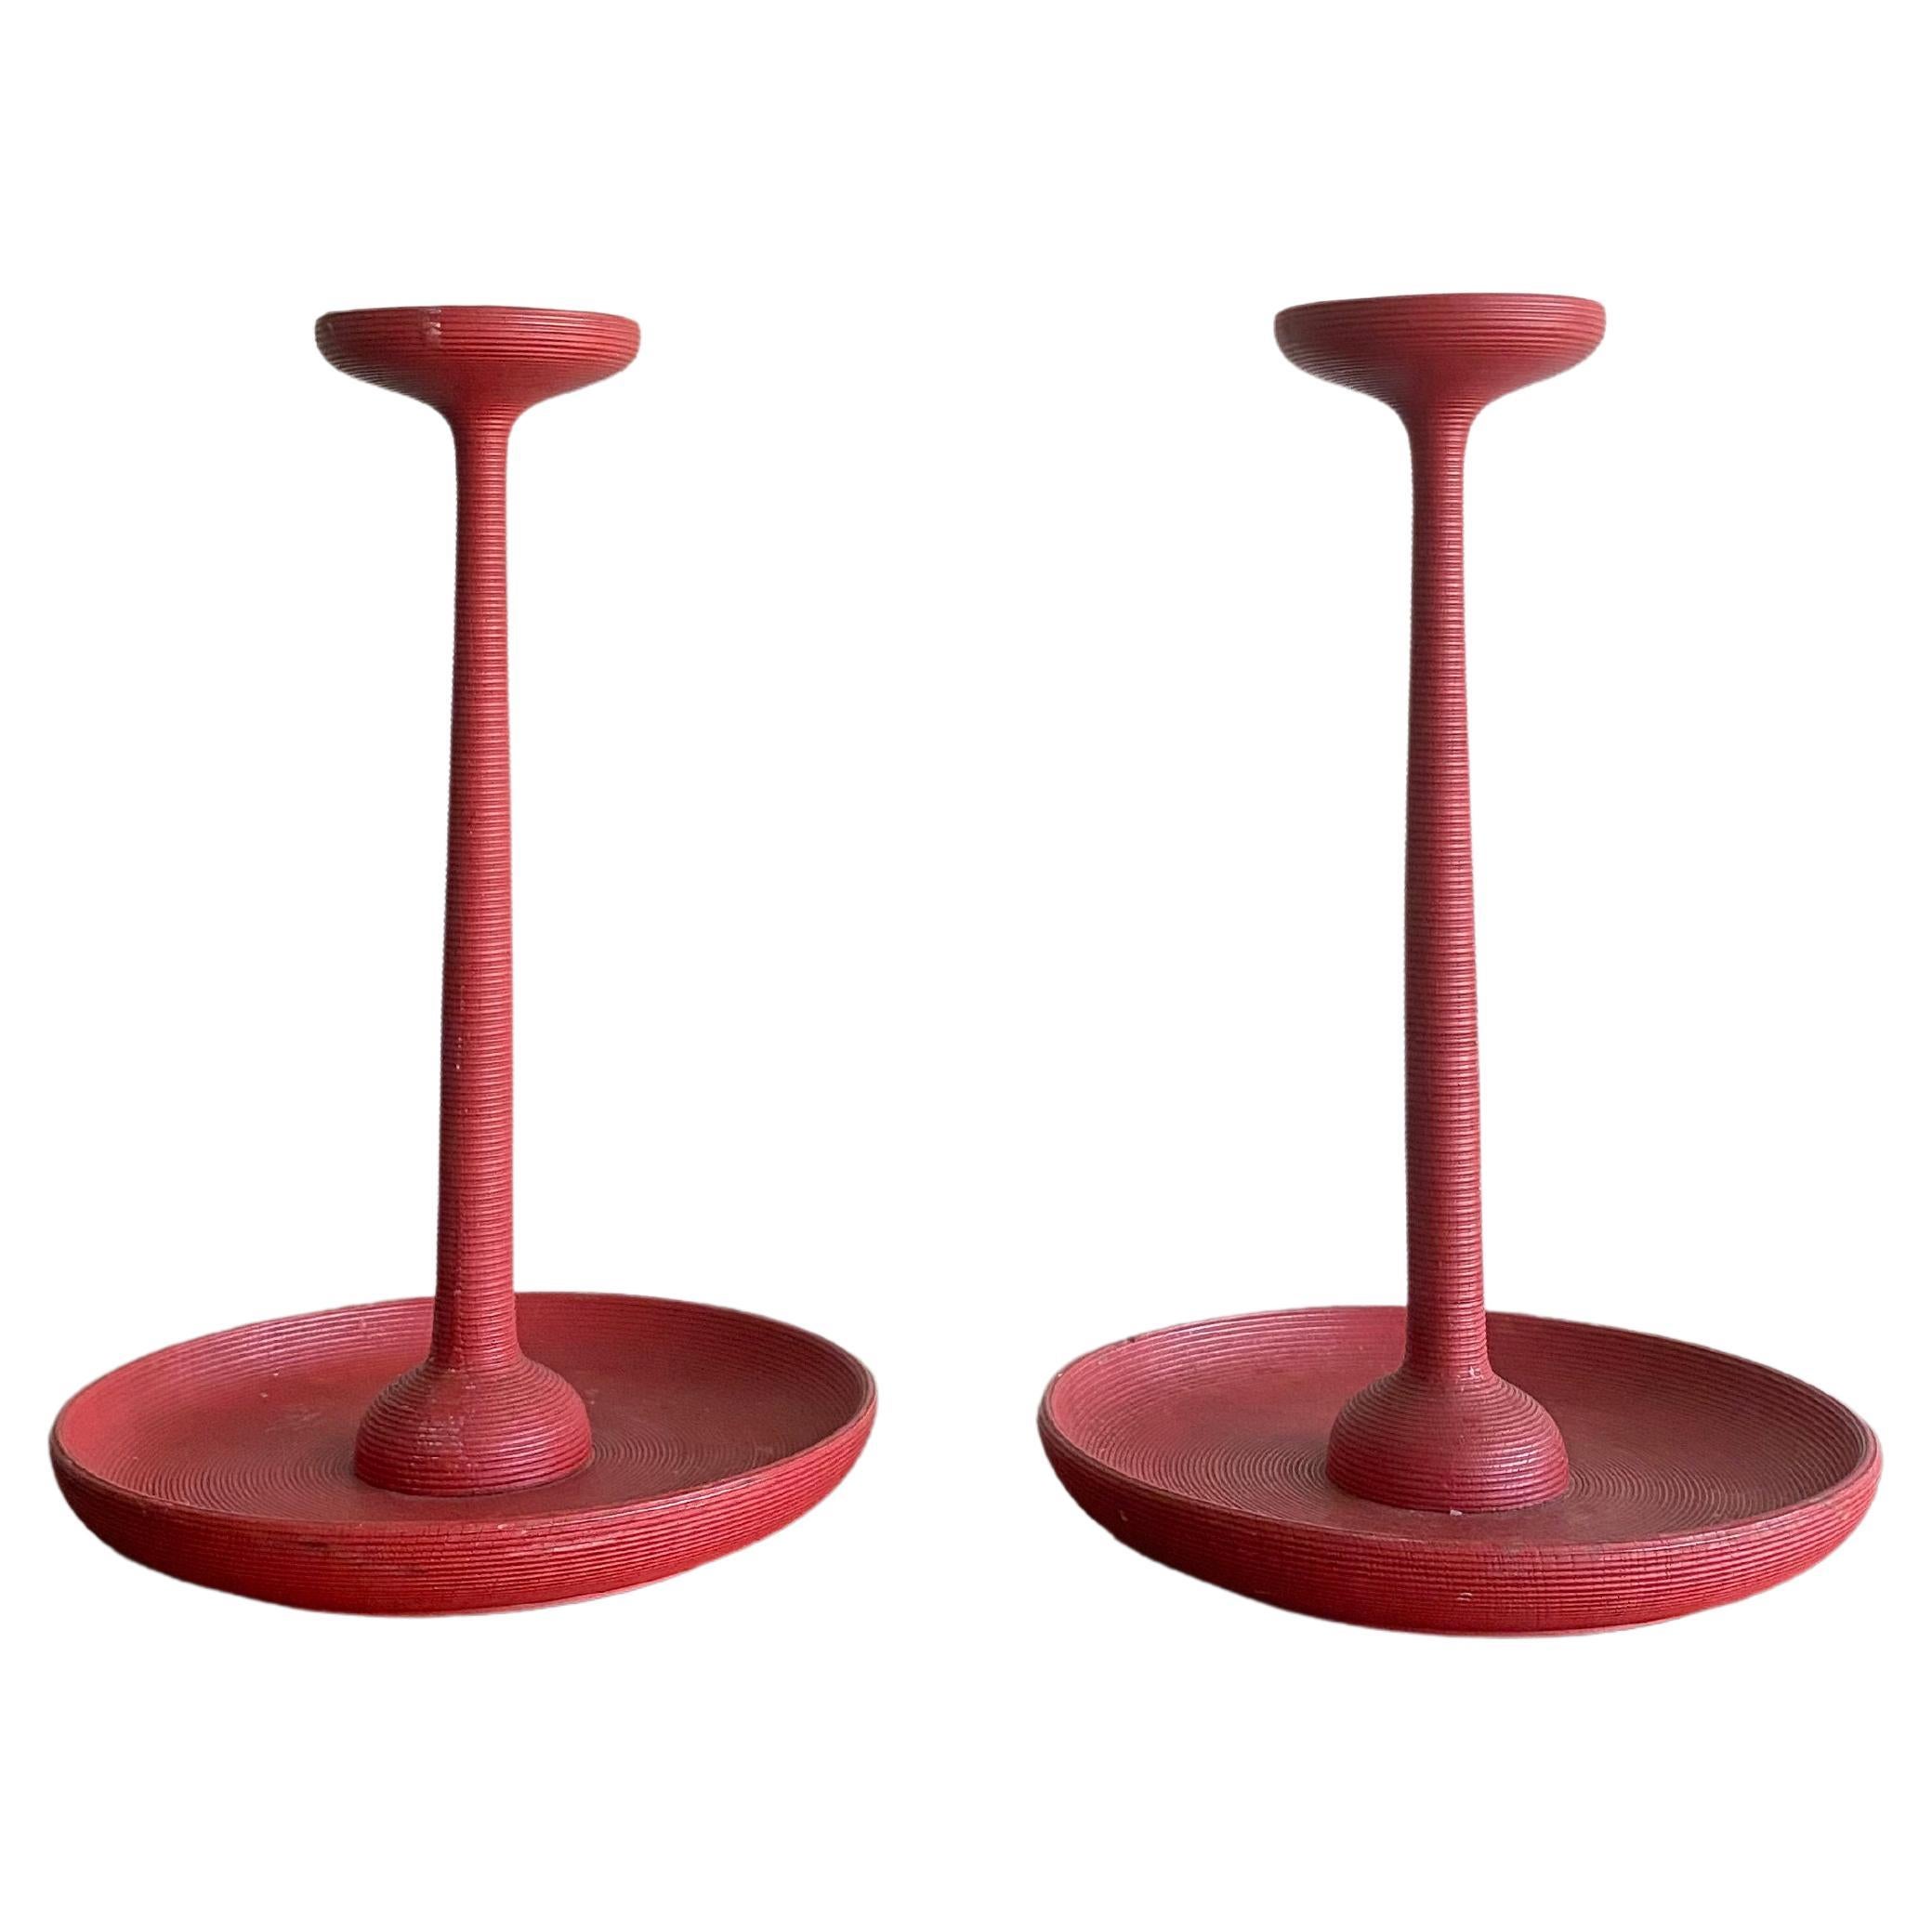 Japanese Red Lacquer Ribbed Candle Holder Pair, Meji Period c. 1900 For Sale